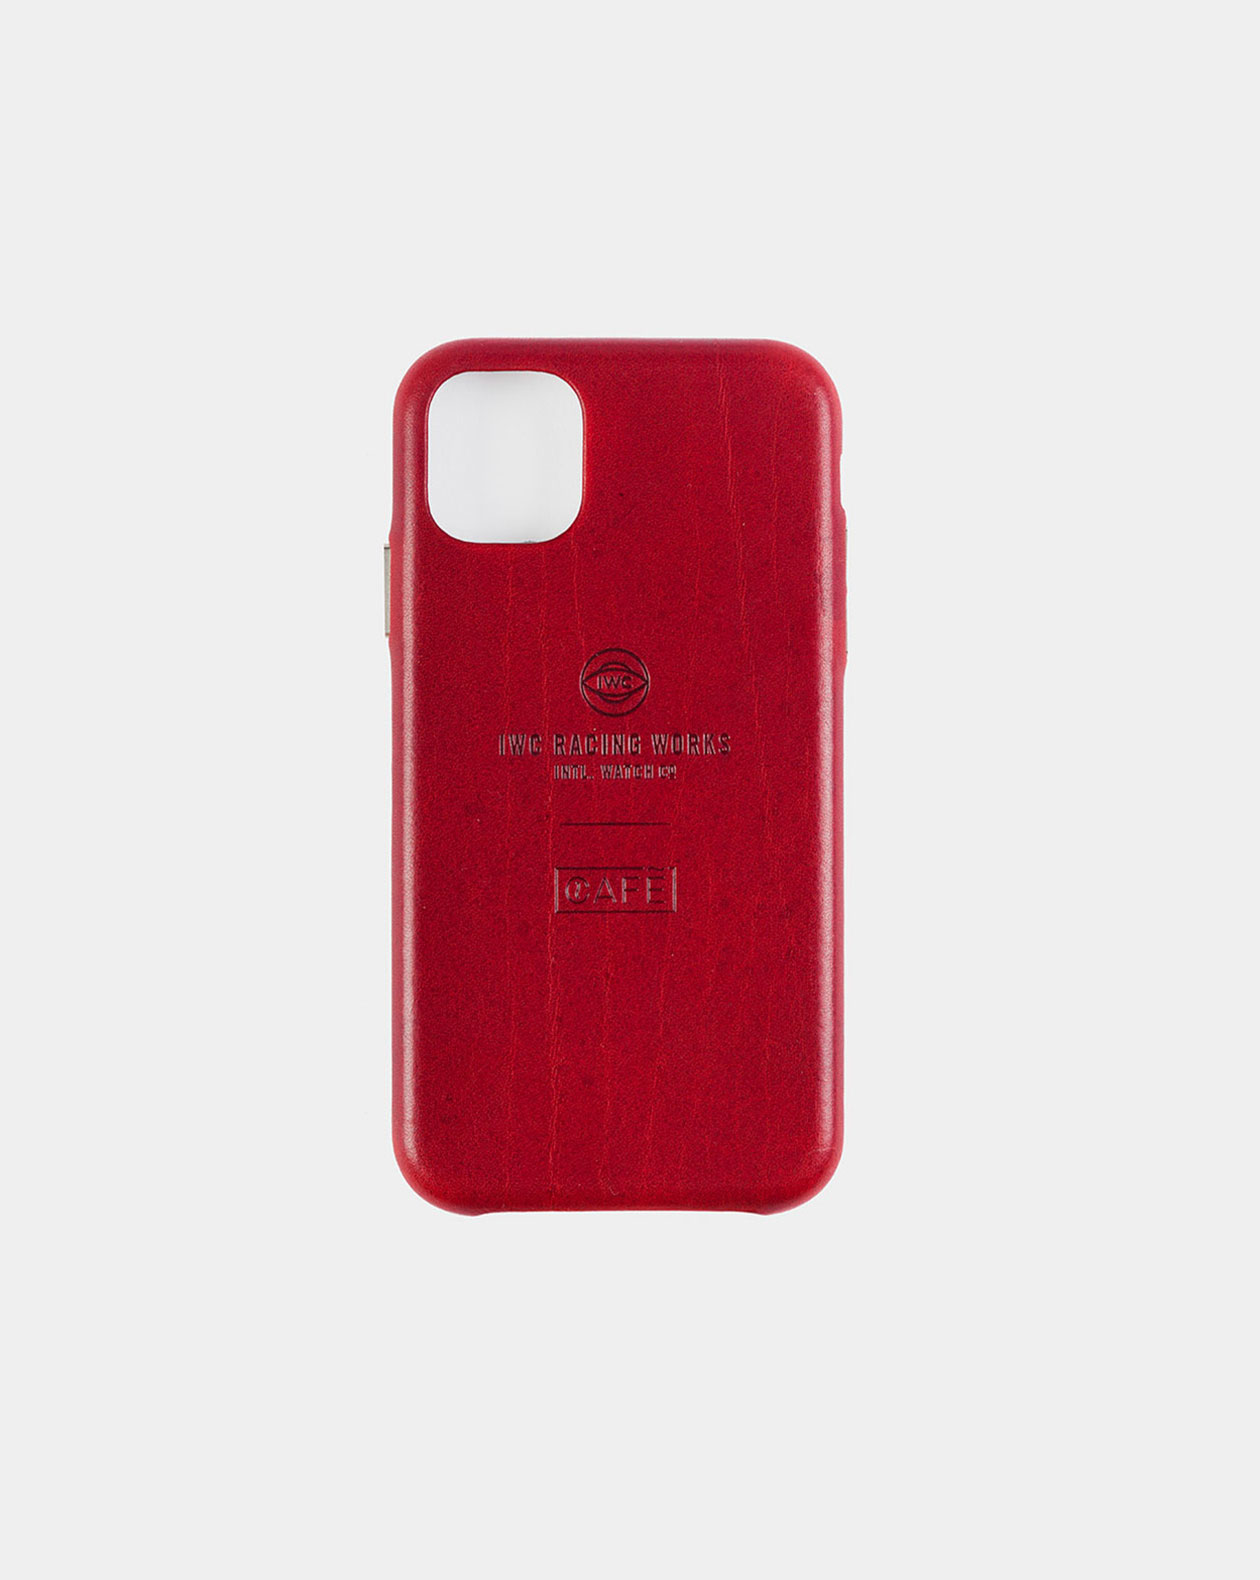 iwc iphone case red back